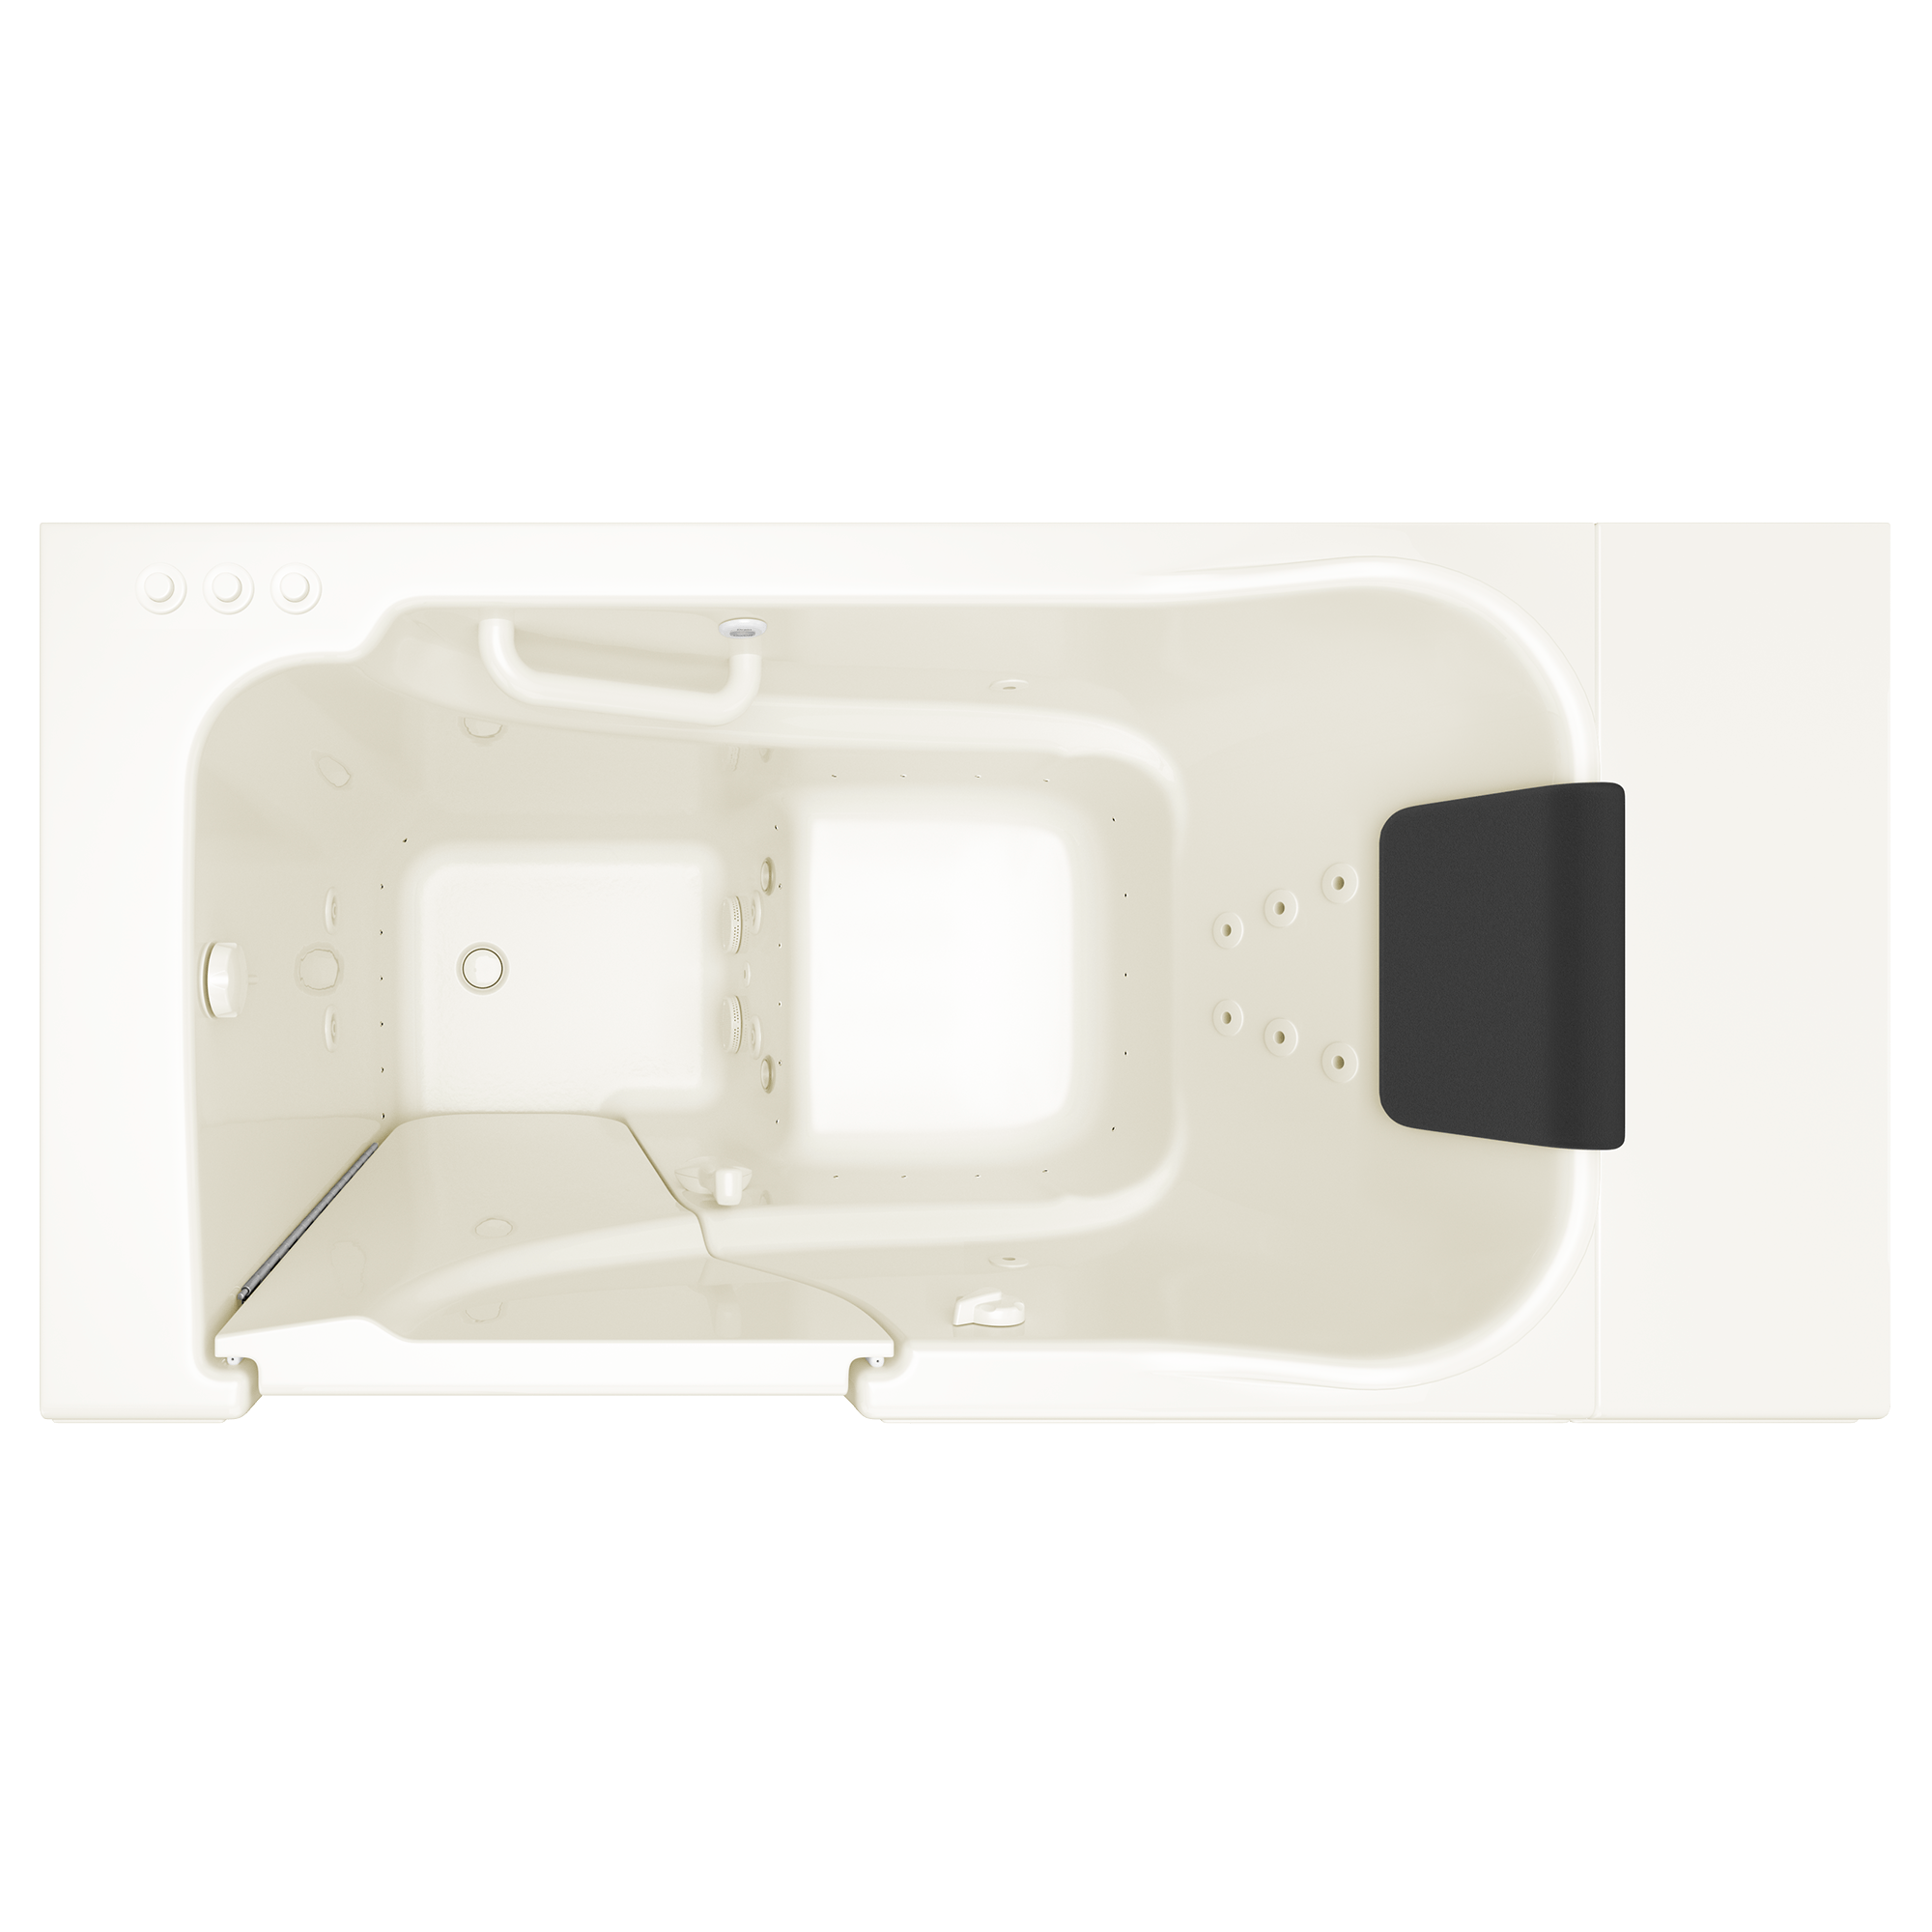 Gelcoat Premium Series 30 x 52 -Inch Walk-in Tub With Combination Air Spa and Whirlpool Systems - Left-Hand Drain